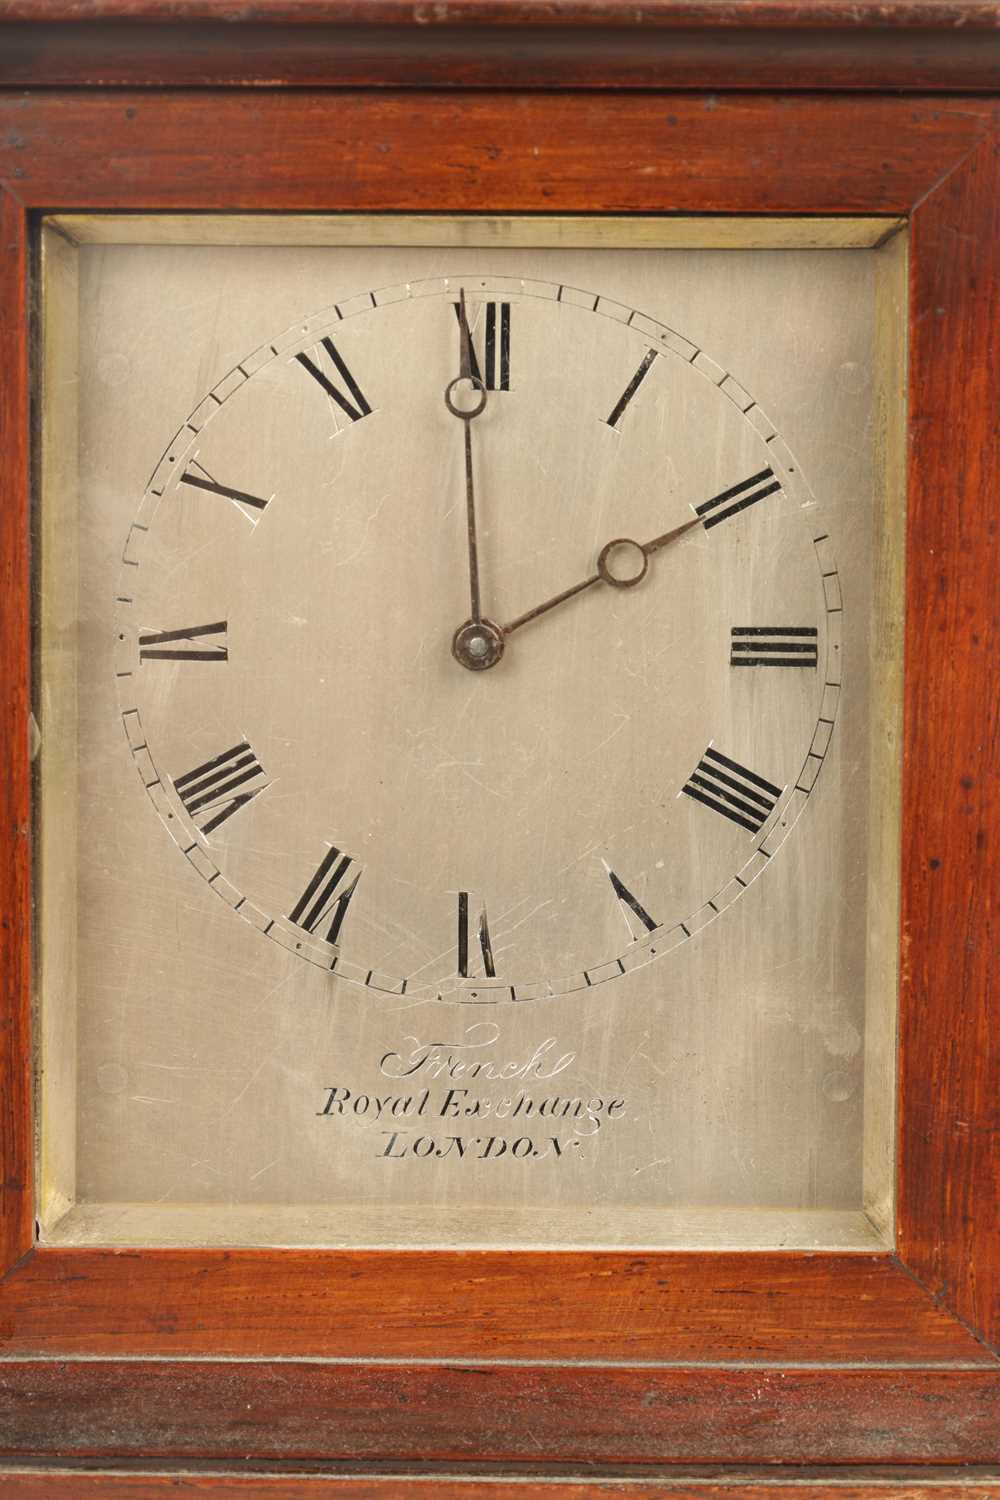 FRENCH, ROYAL EXCHANGE, LONDON. A SMALL CARRIAGE STYLE ENGLISH FUSEE MANTEL CLOCK - Image 13 of 14